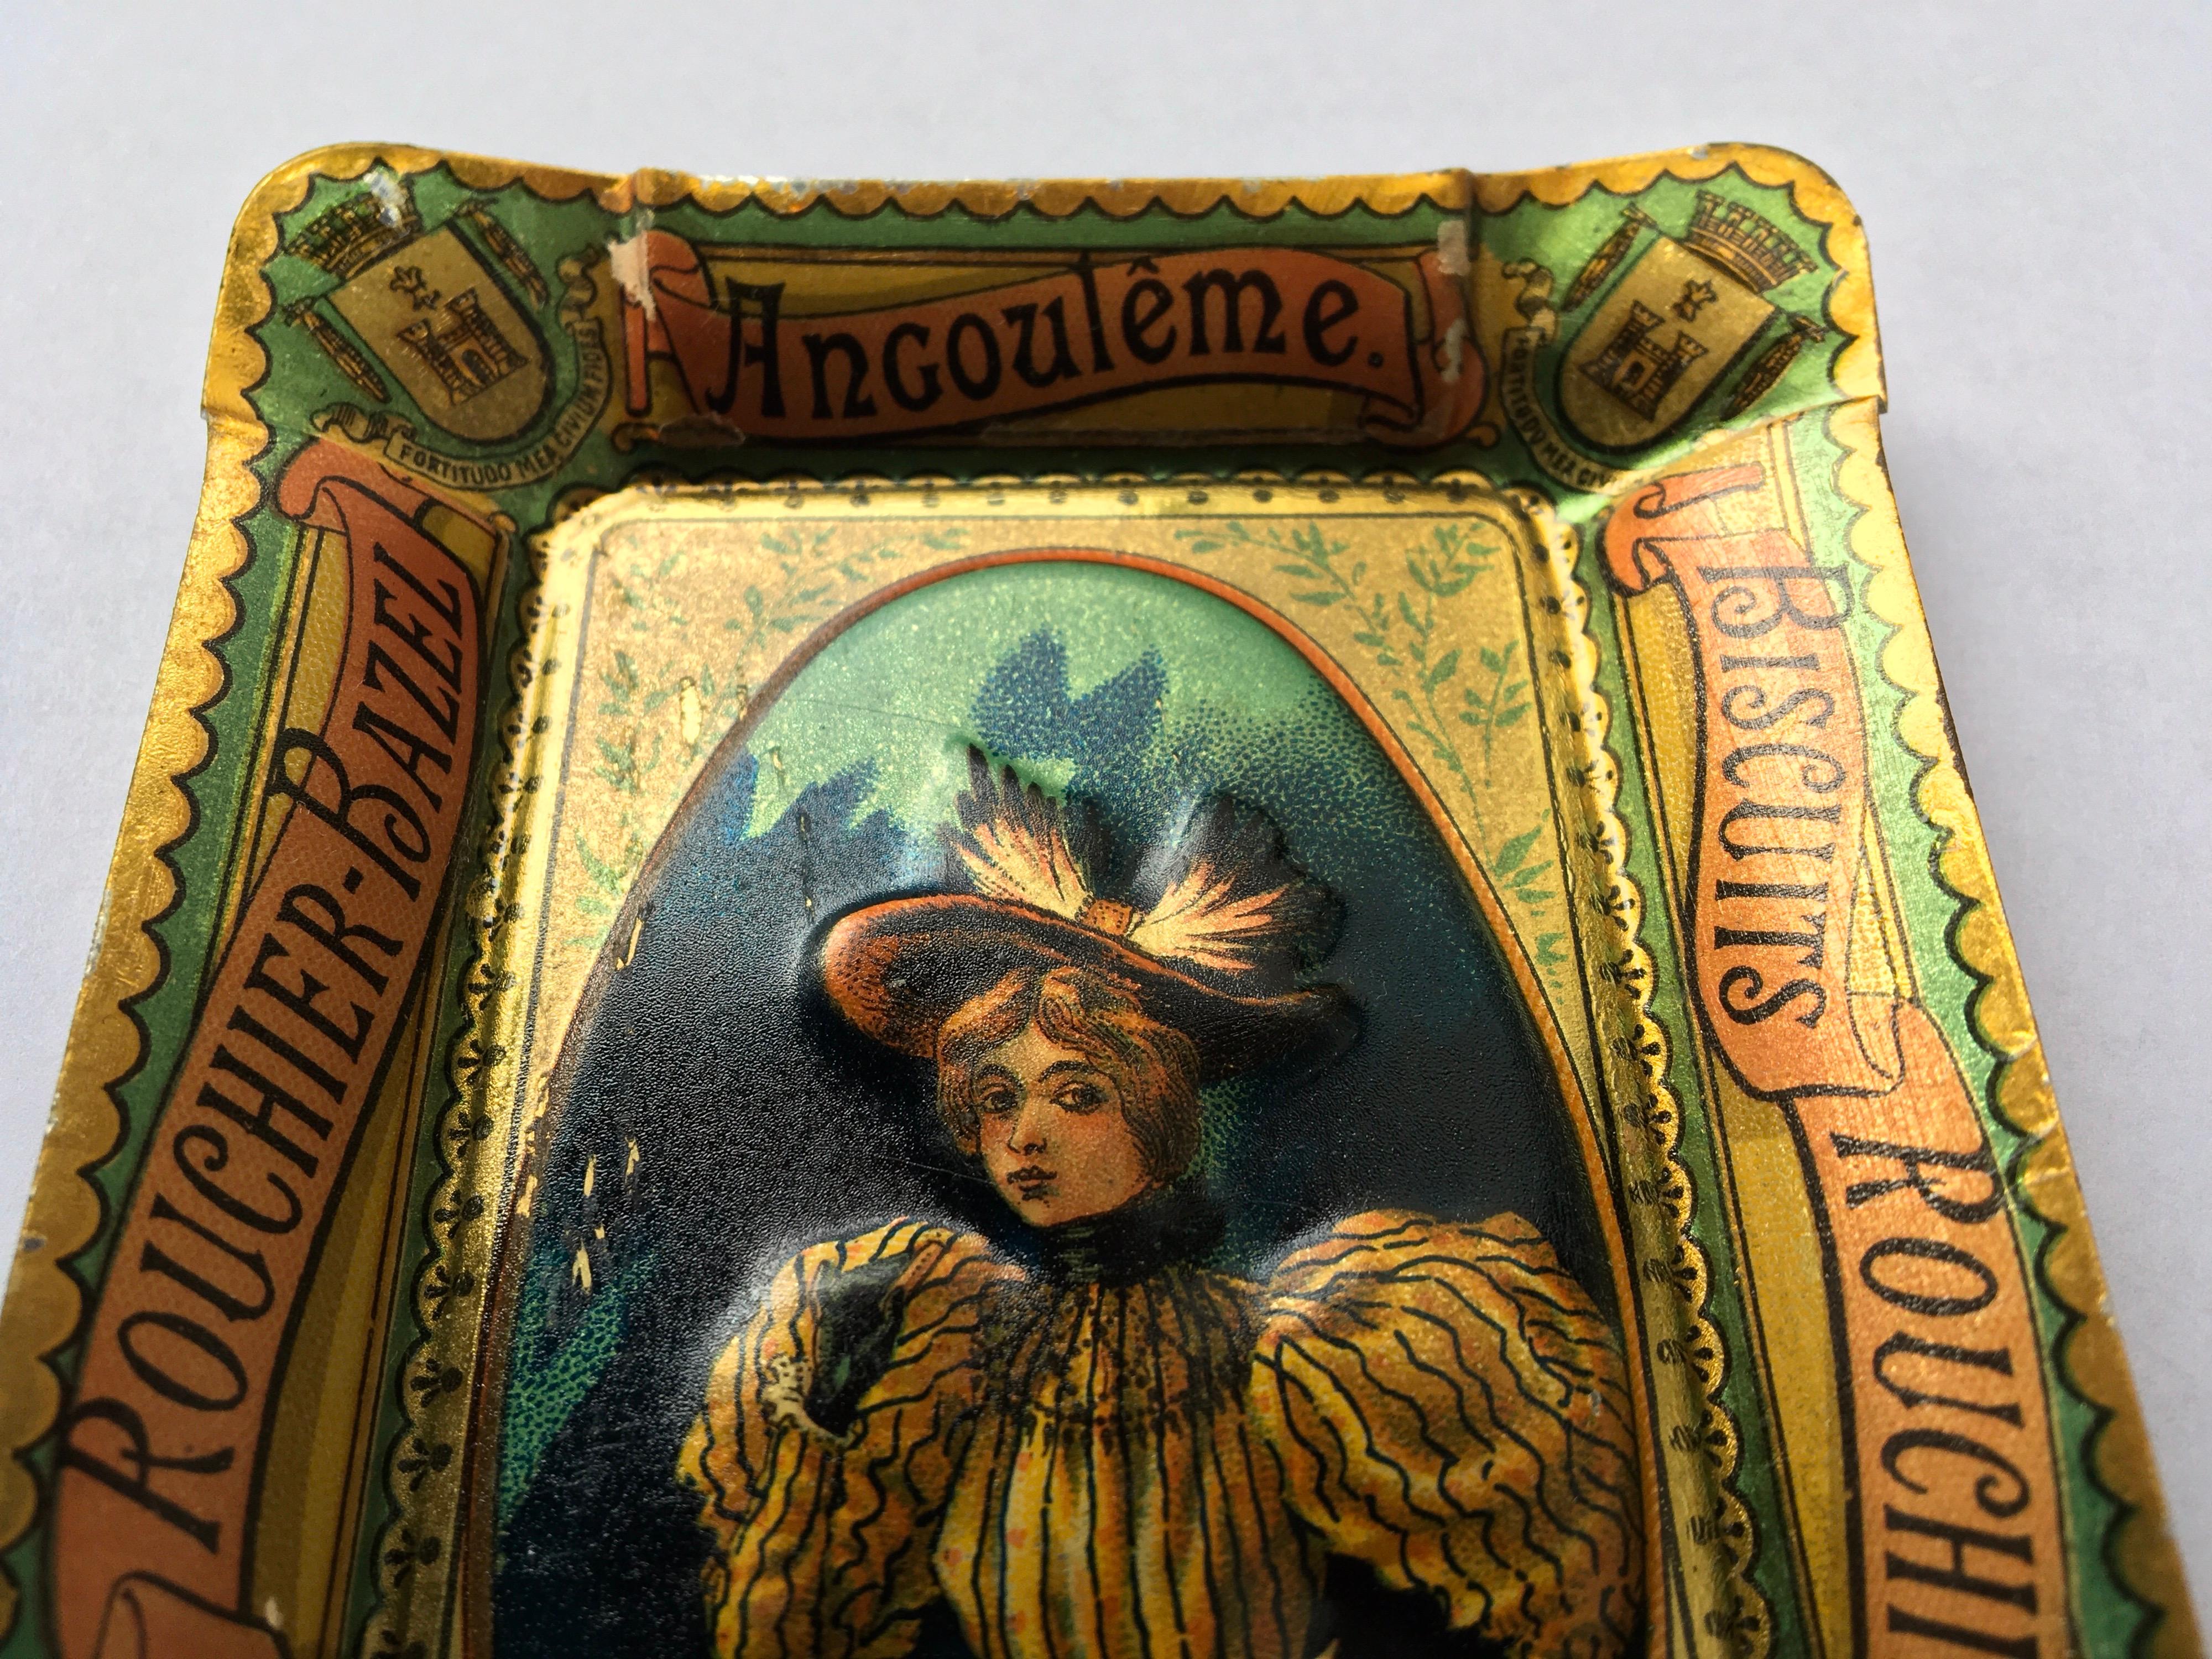 Antique Tin tray, dish or ashtray for Biscuits Rouchier Bazel wich was located in Angoulême France. 
This French lithographic and embossed tray dates circa 1900. It shows an elegant lady holding a box of biscuits and wearing the typical clothing of